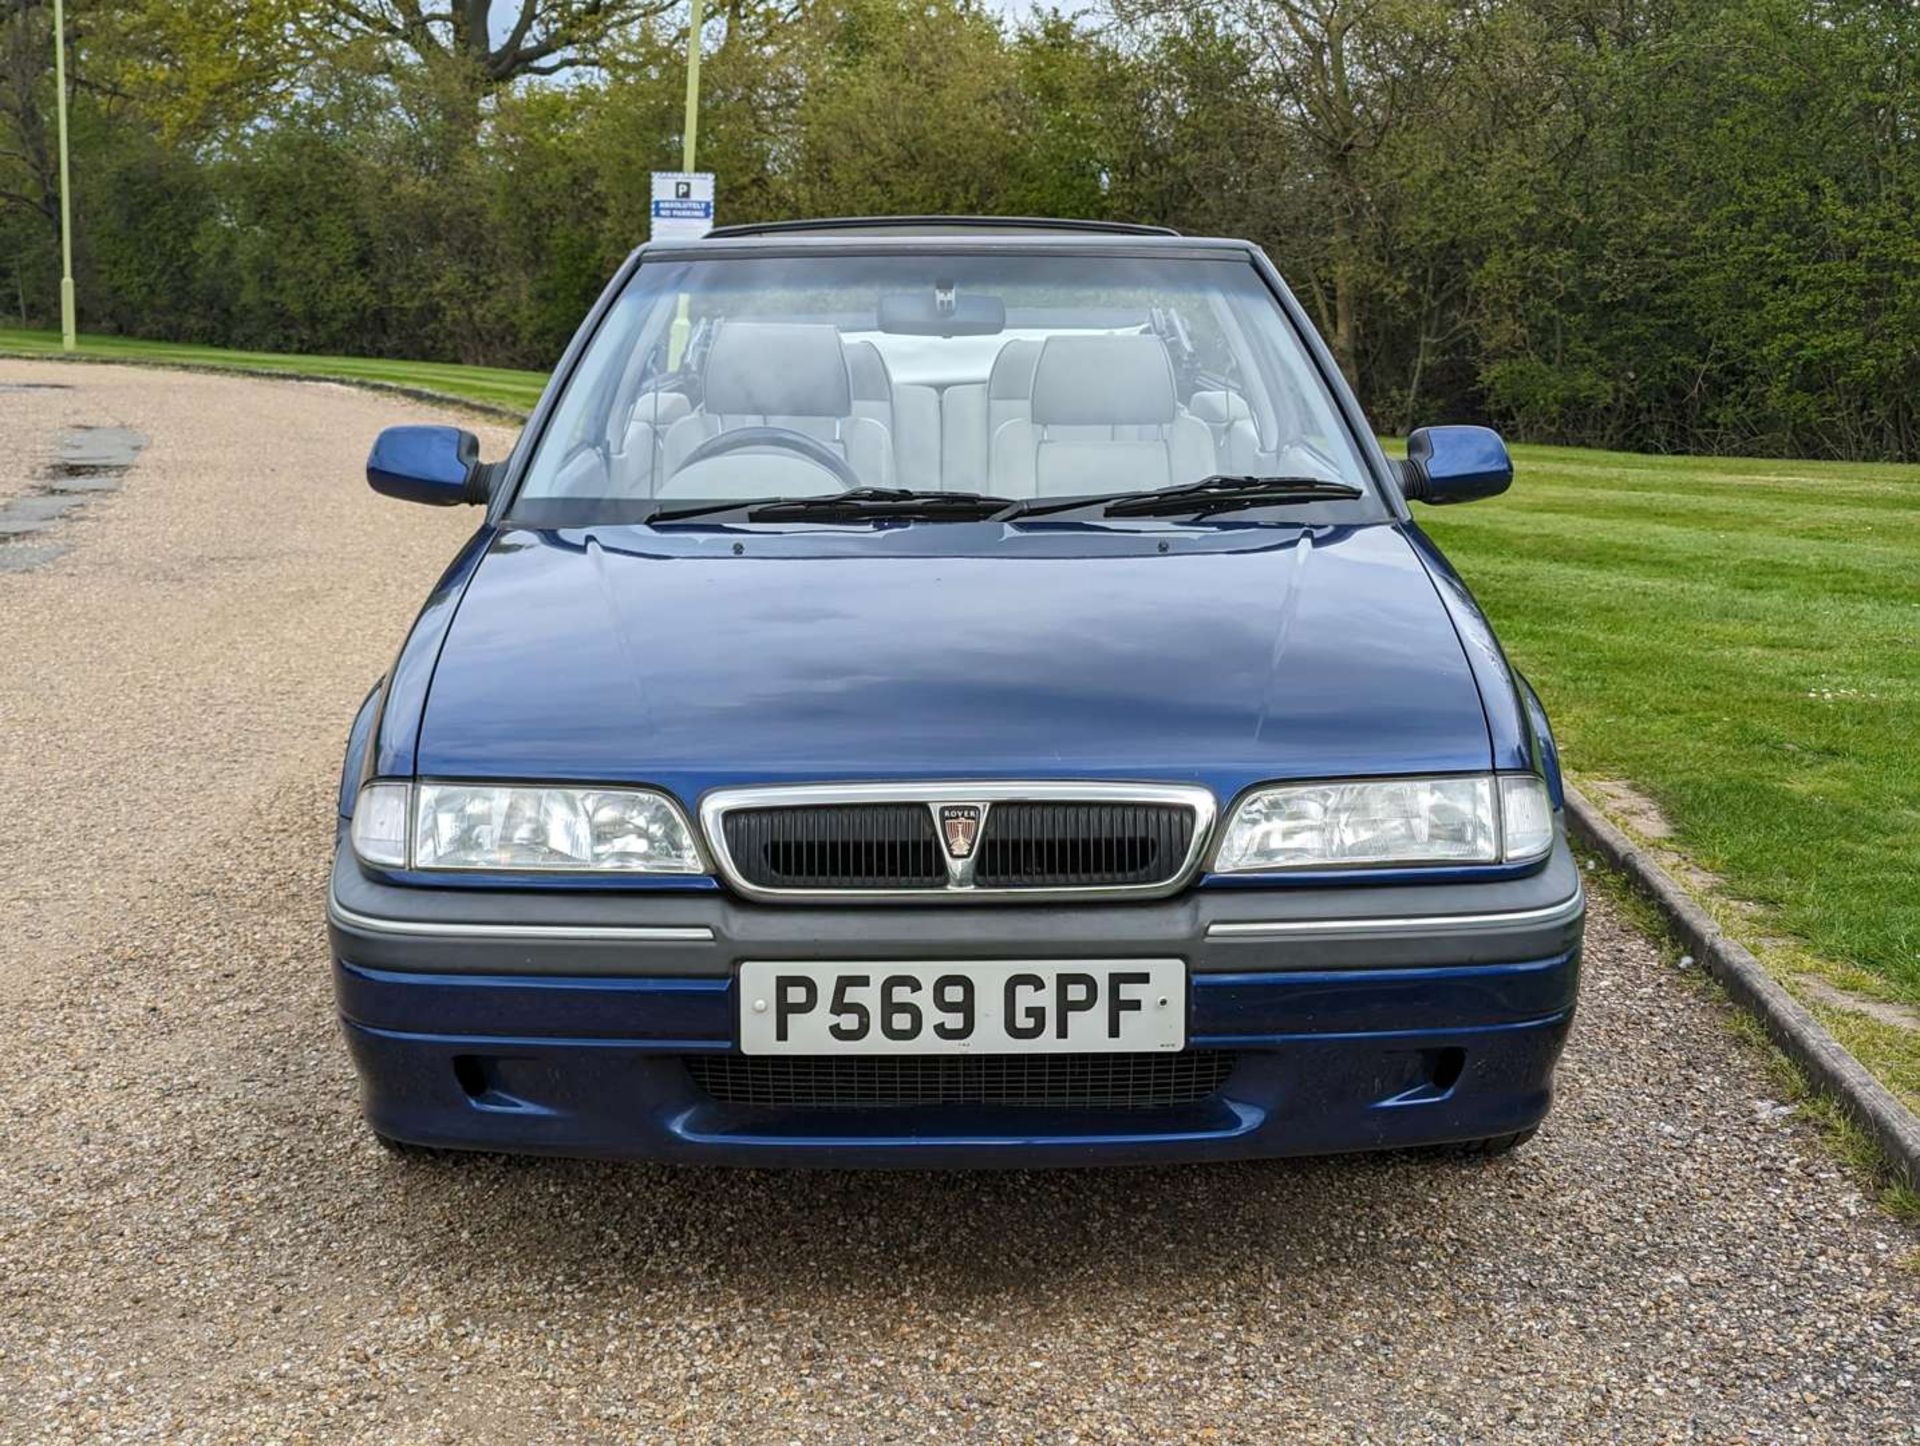 1997 ROVER 216 CABRIOLET - Image 2 of 28